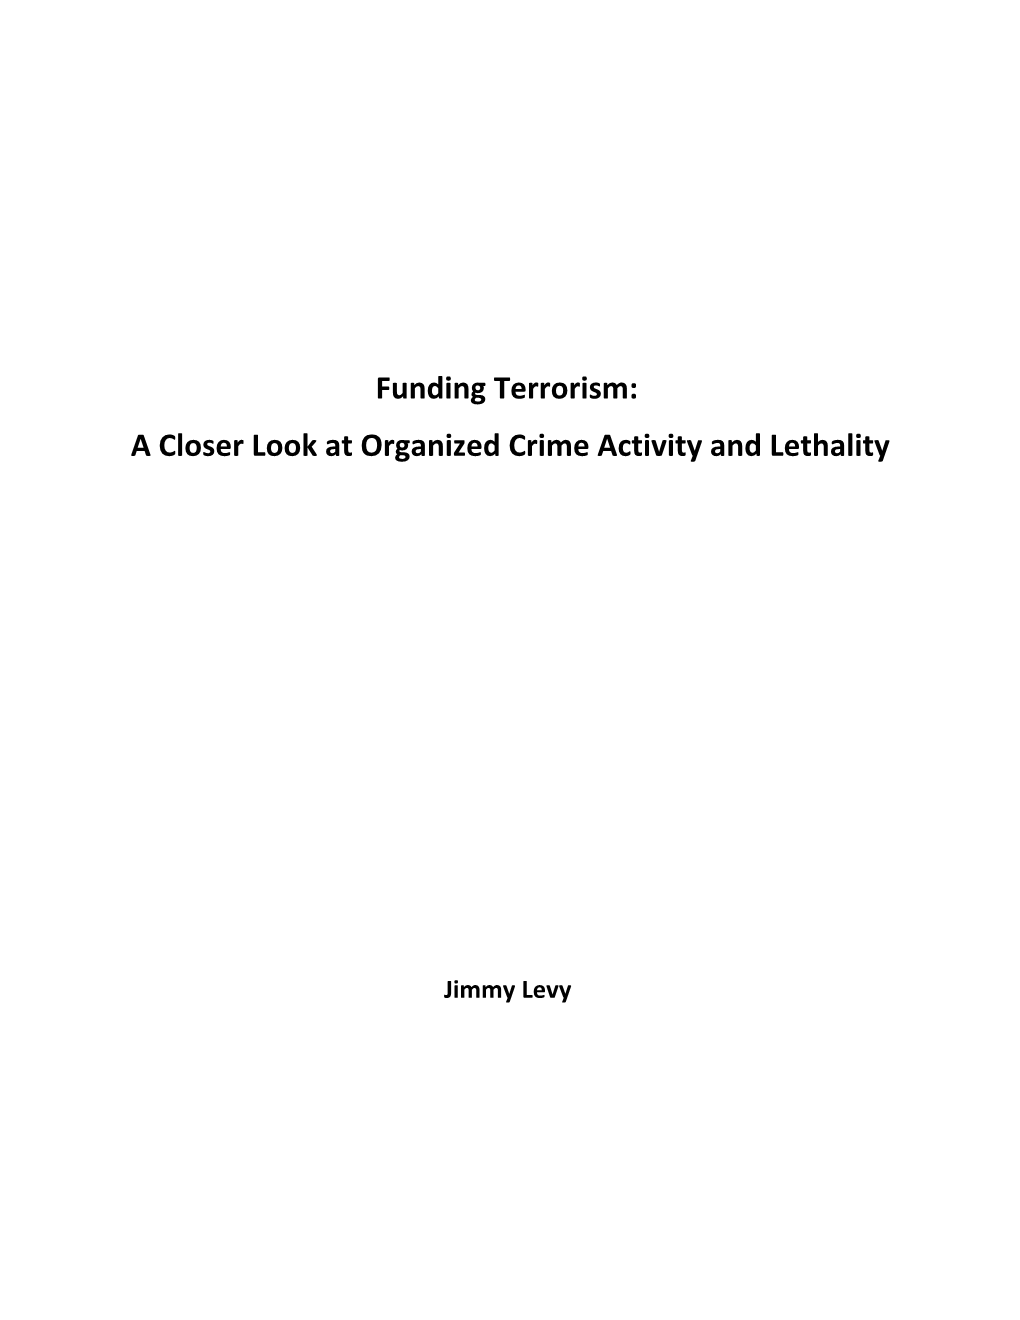 A Closer Look at Organized Crime Activity and Lethality